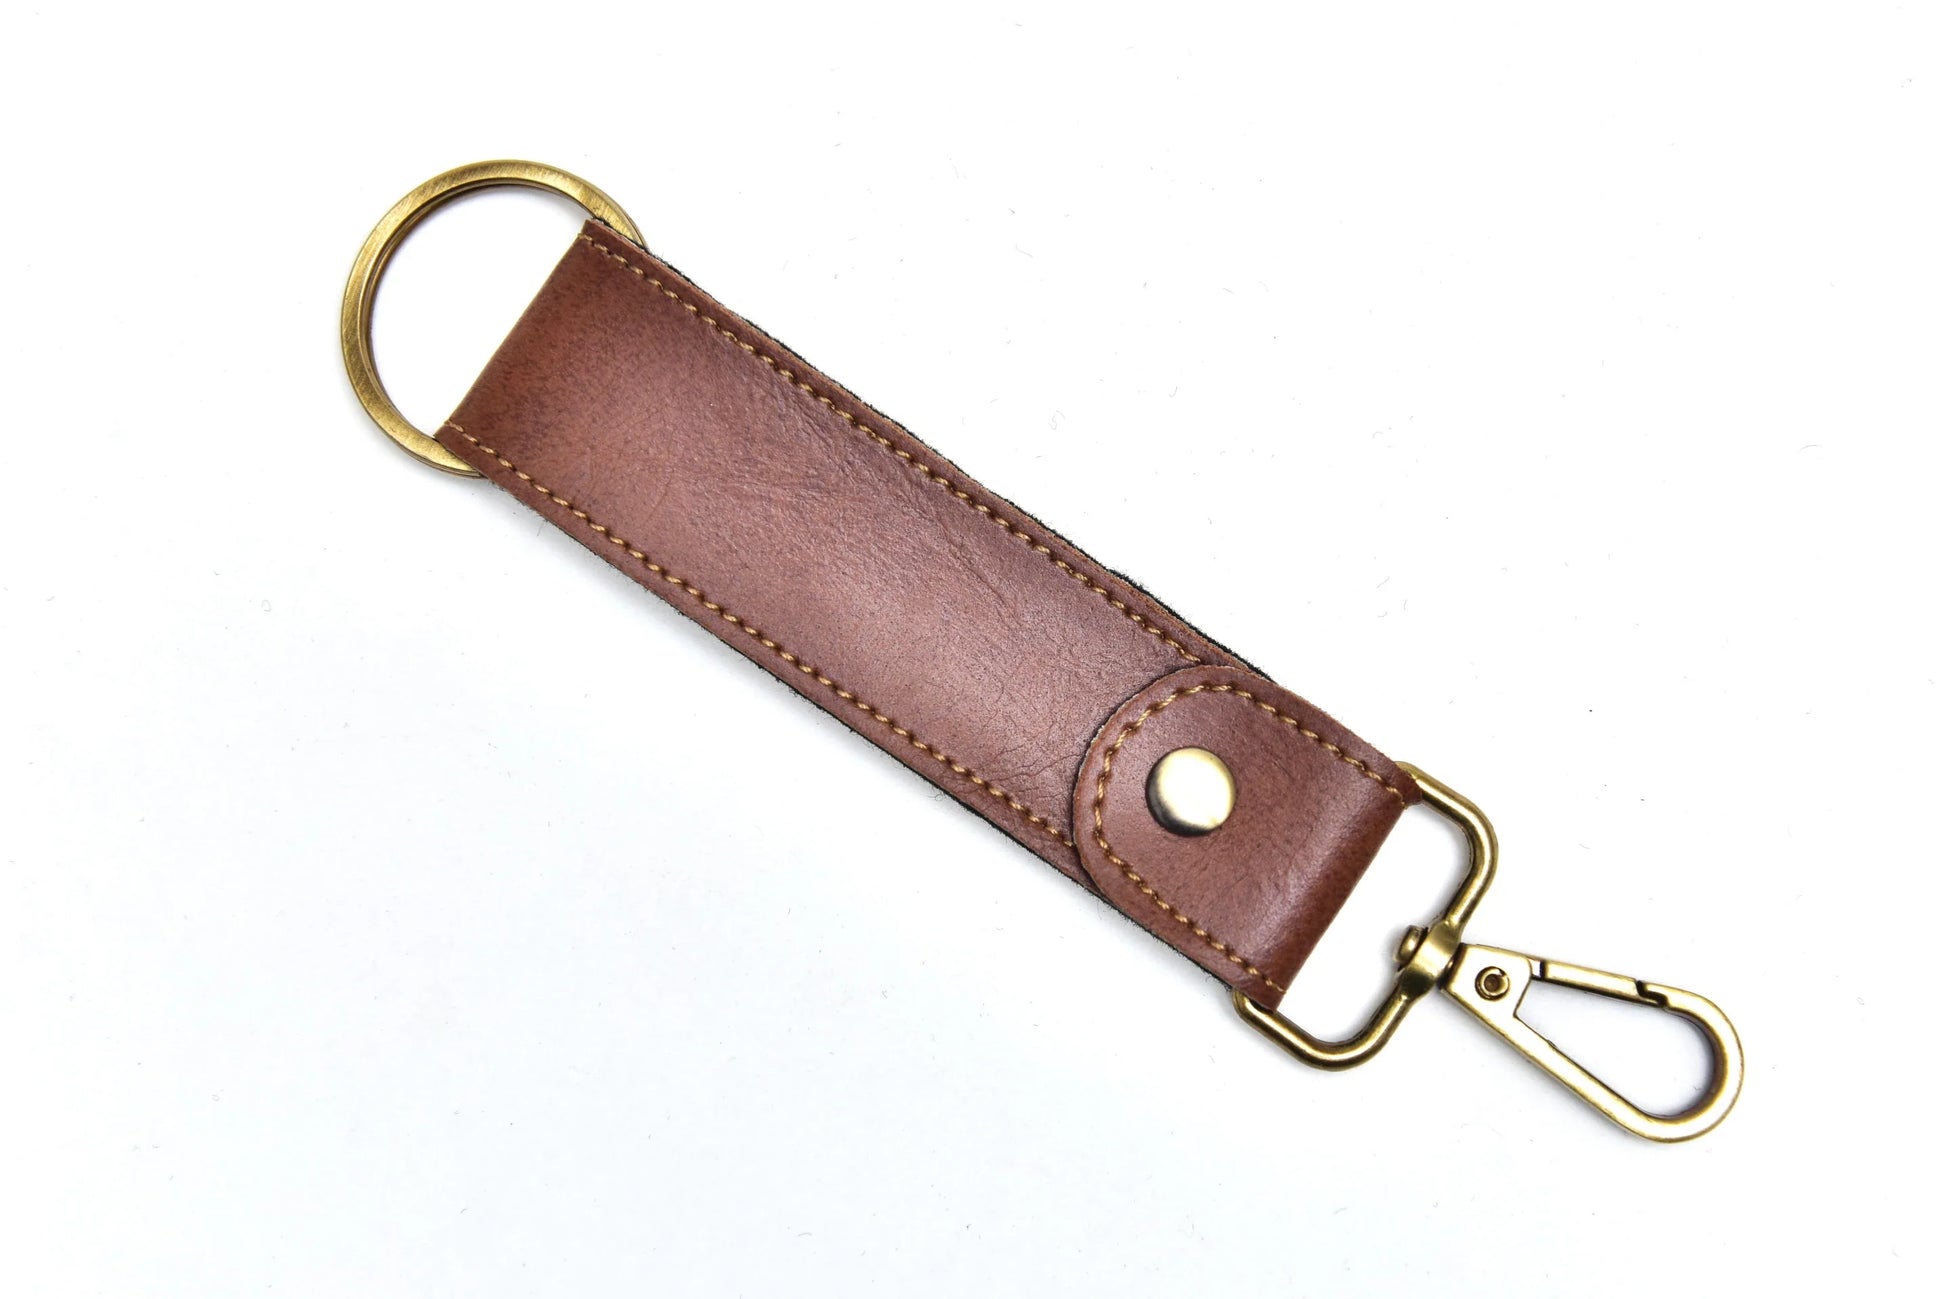 "The sleek, modern design of this leather keychain adds a touch of sophistication to your everyday carry. "